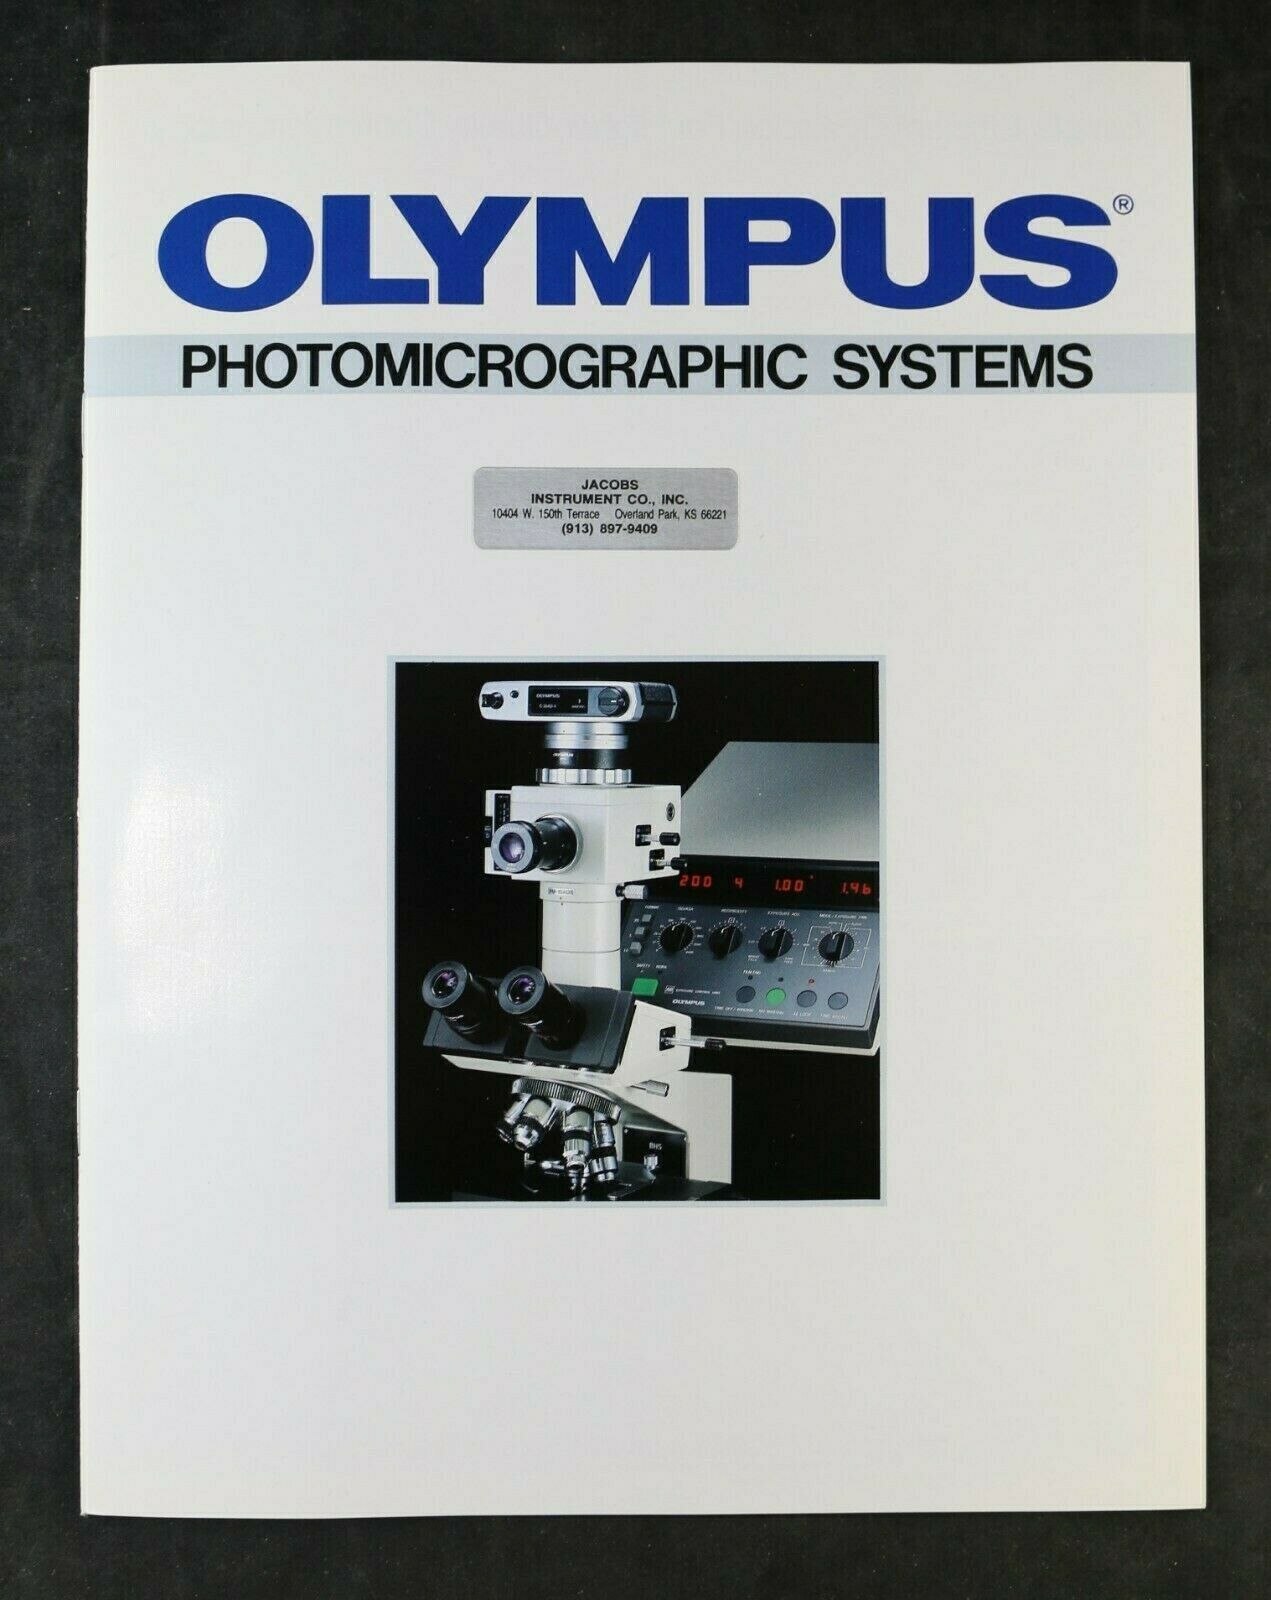 Olympus Photomicrographic Systems Brochure -vtg 1990s